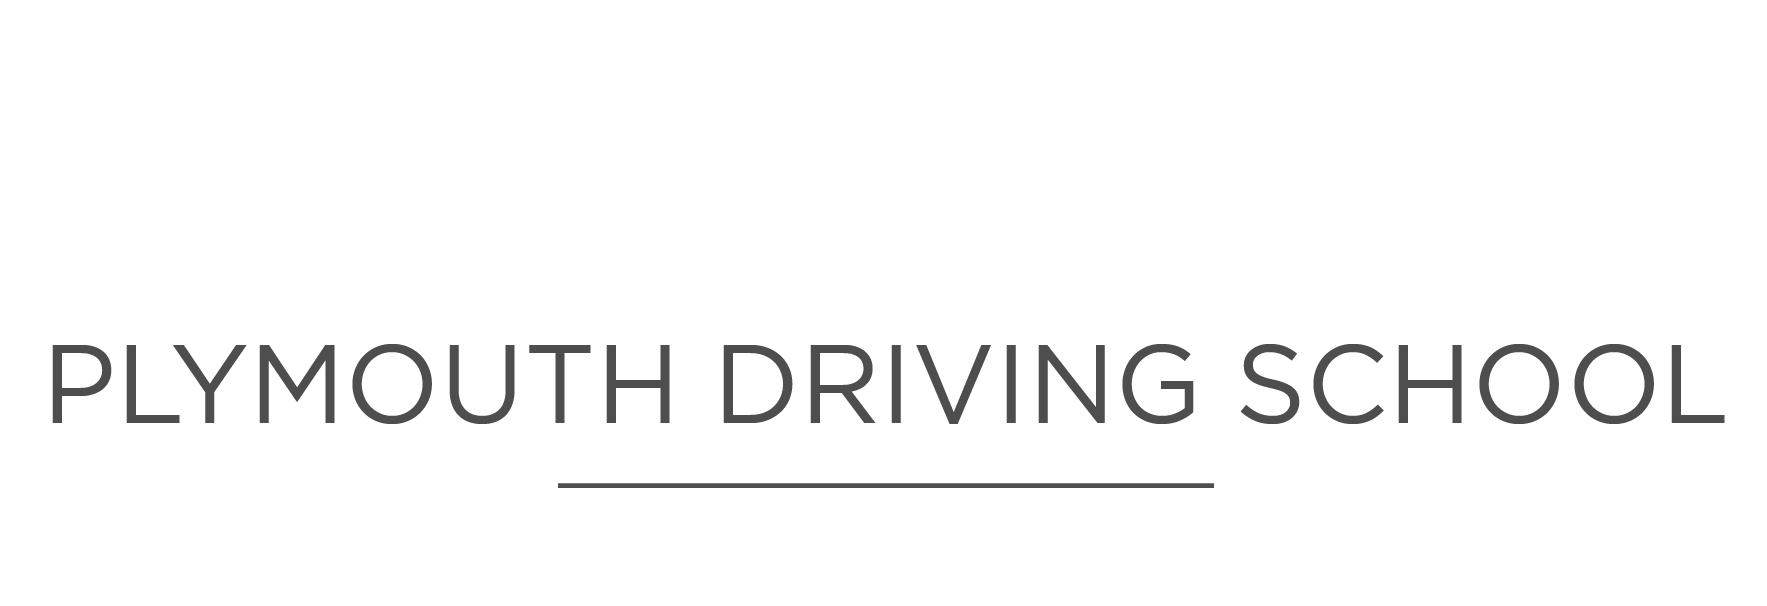 Plymouth Driving School